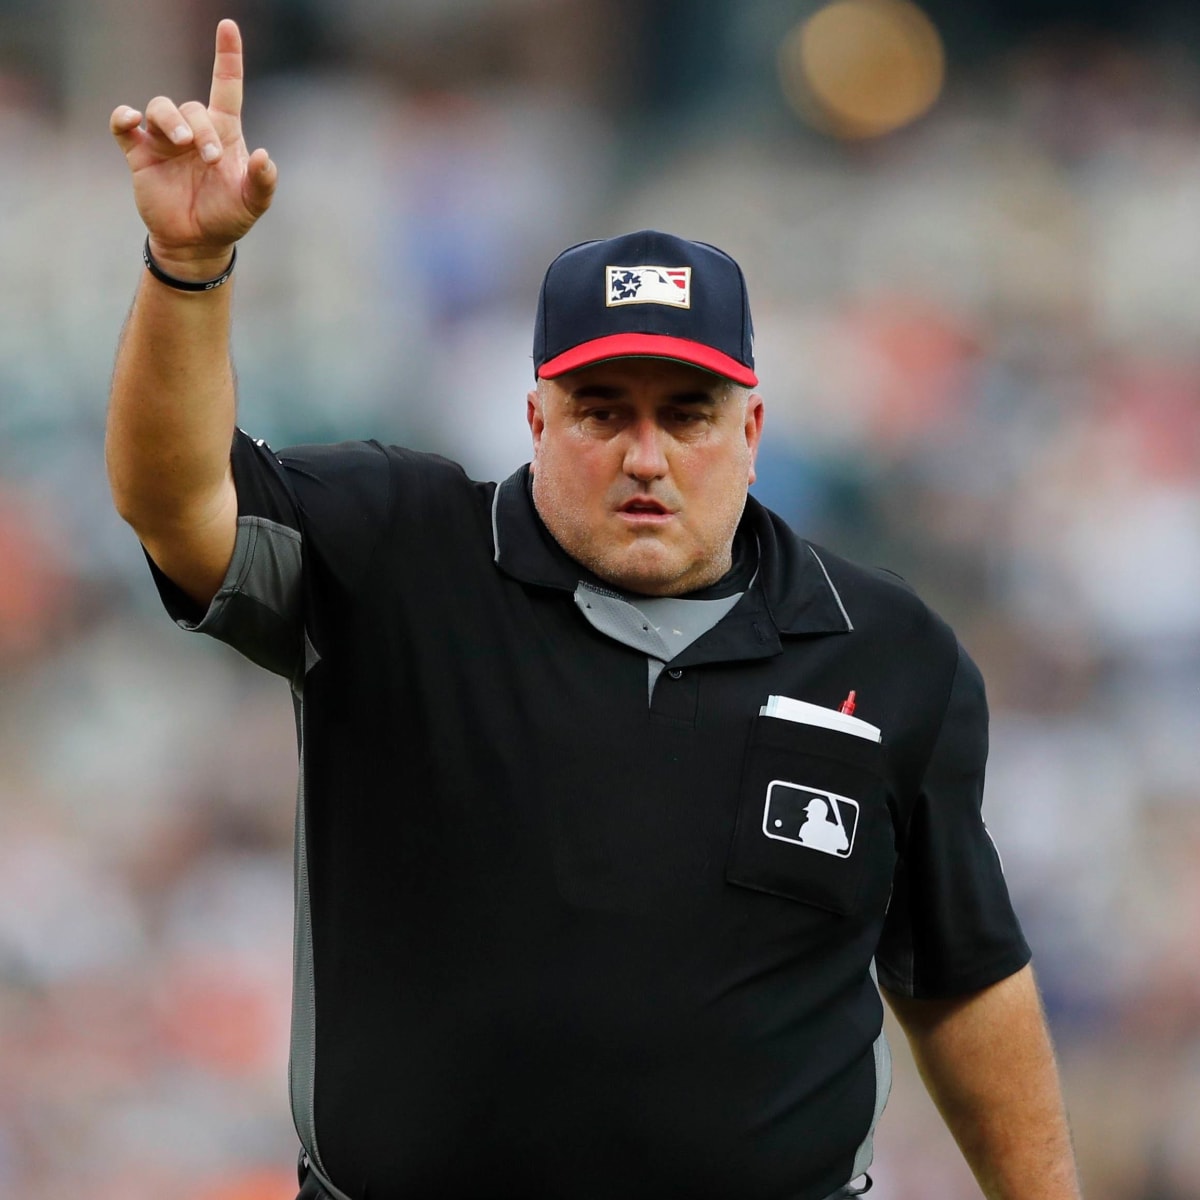 Umpires to honor Iowa native Eric Cooper at MLB Field of Dreams game